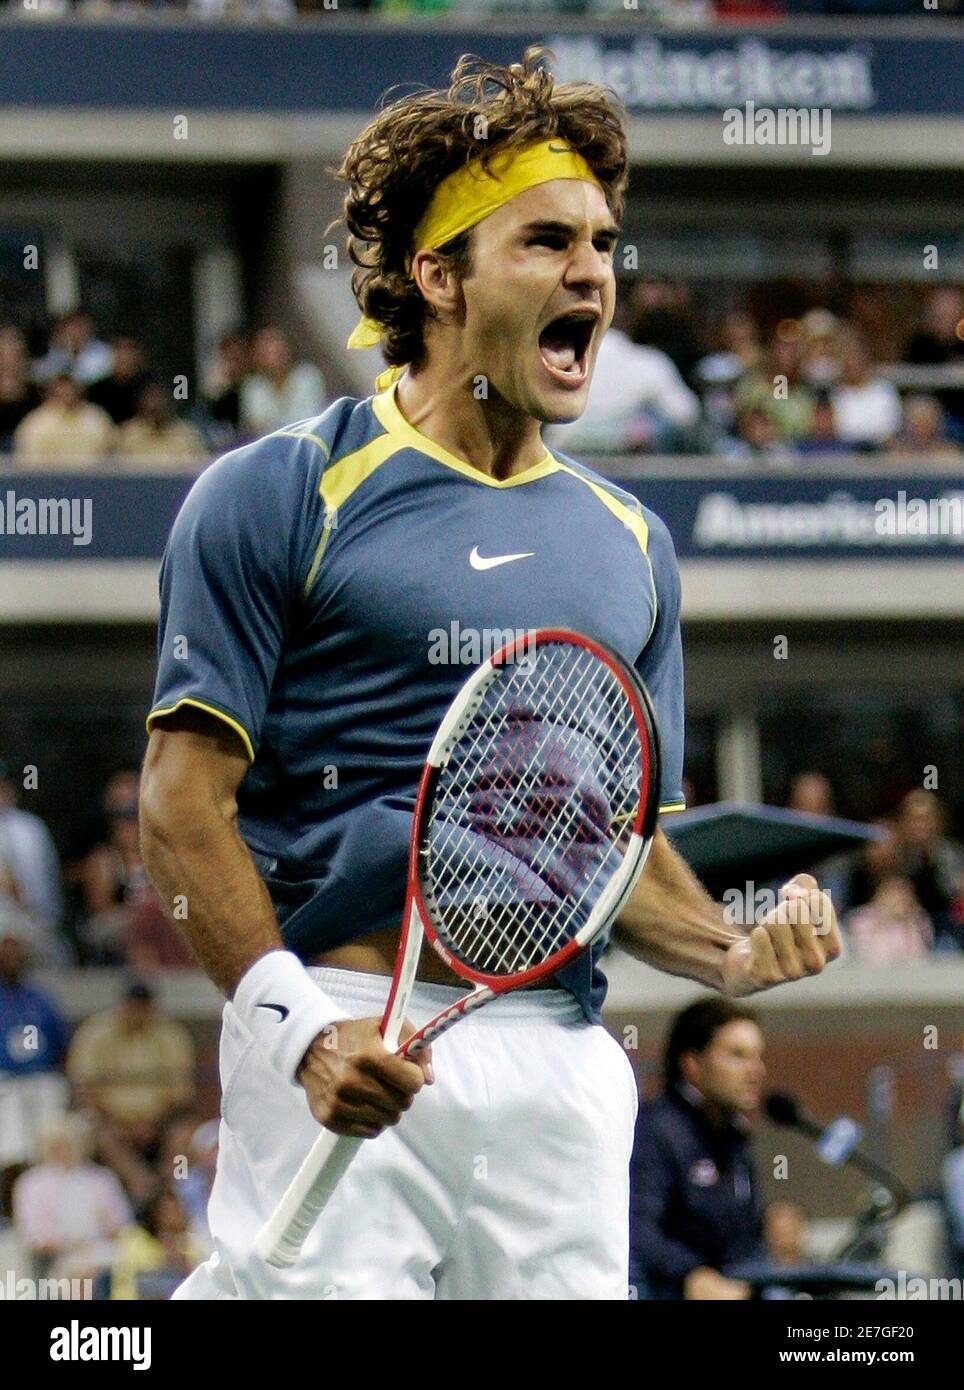 Roger Federer of Switzerland celebrates his win over Andre Agassi of the  U.S. in the men's final at the U.S. Open tennis tournament in Flushing  Meadows, New York, September 11, 2005. Federer